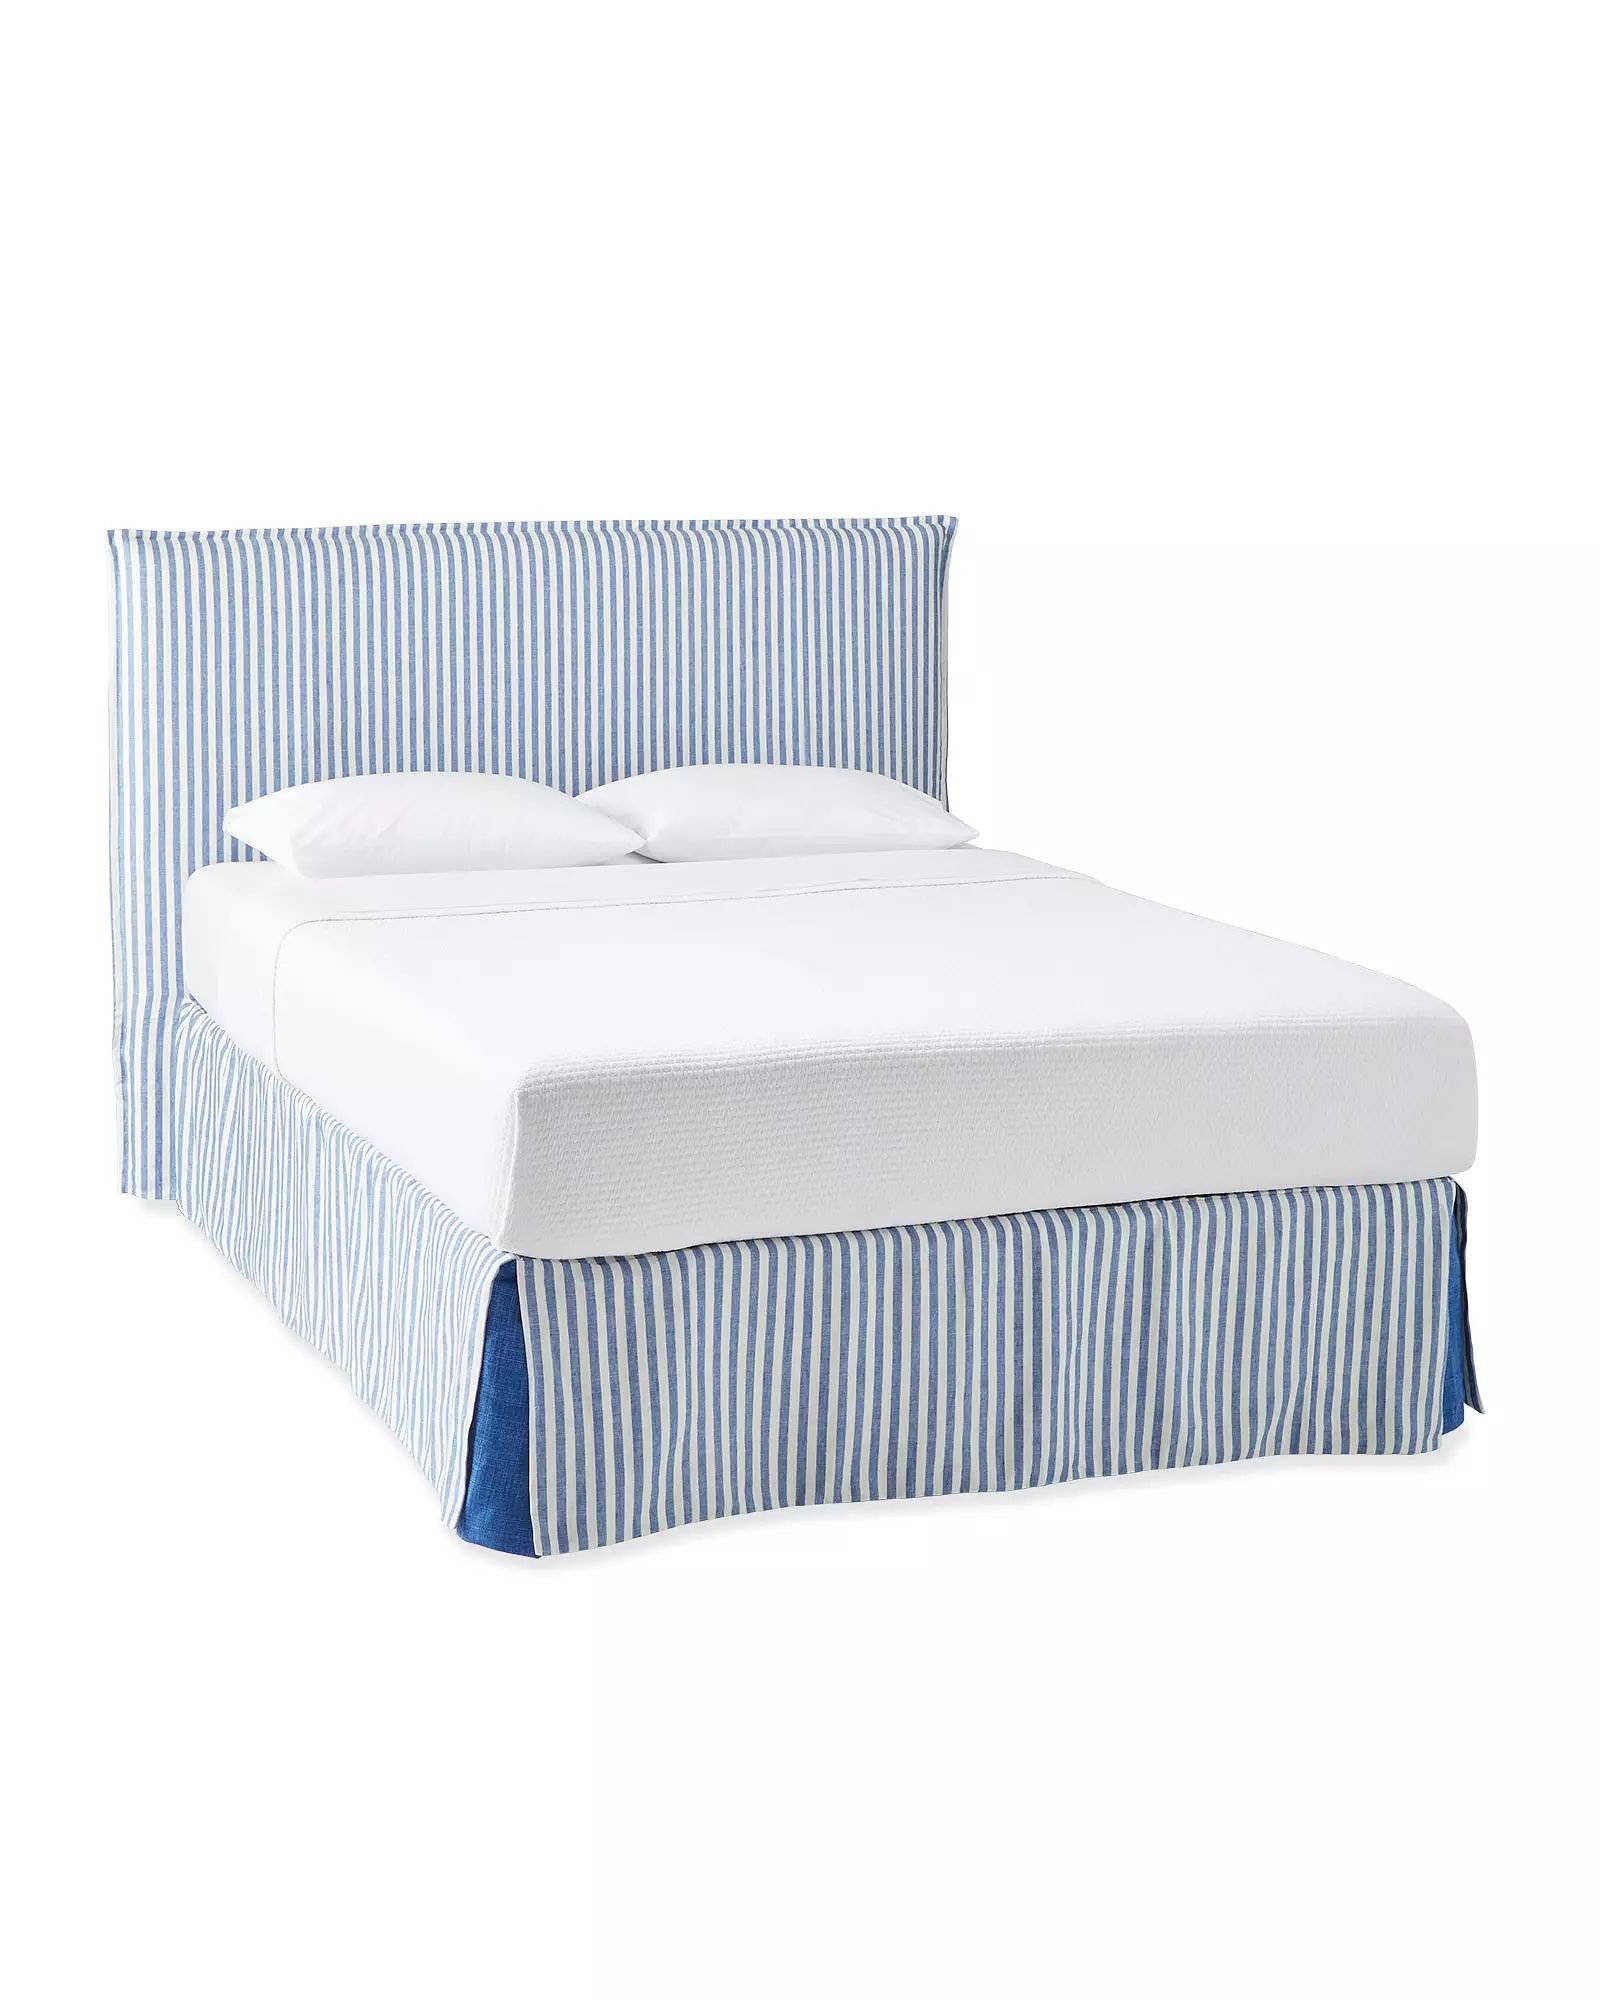 James Headboard & Bedskirt - French Blue Bengal Stripe | Serena and Lily